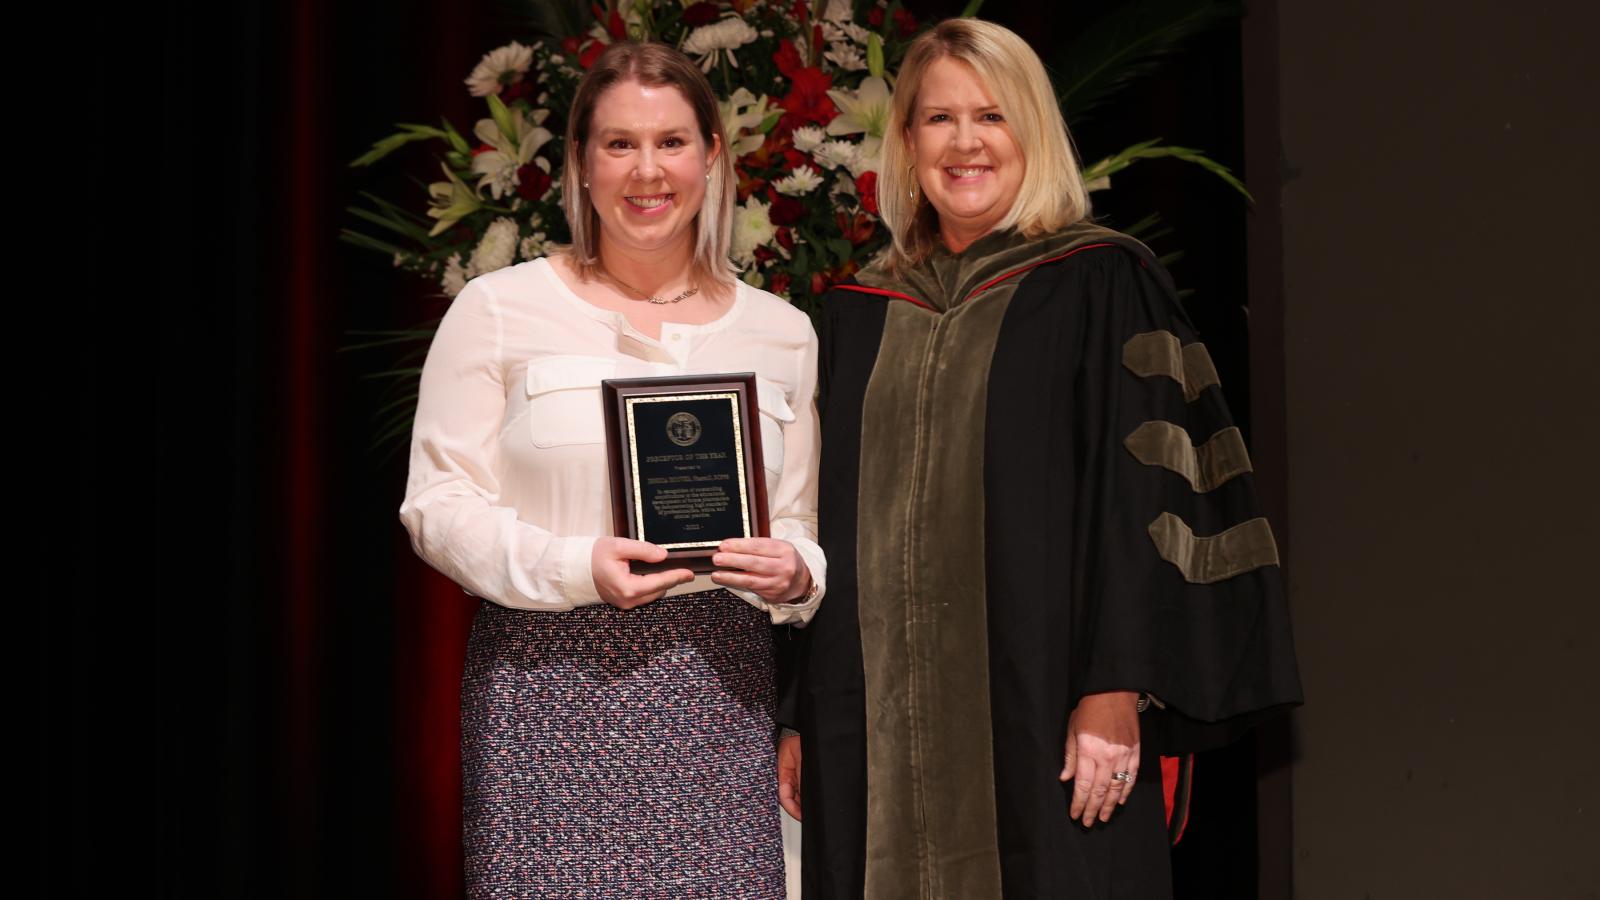 Dr. Hoover receiving the Preceptor of the Year award, next to Julie Legg, PharmD, Director of Experiential Education